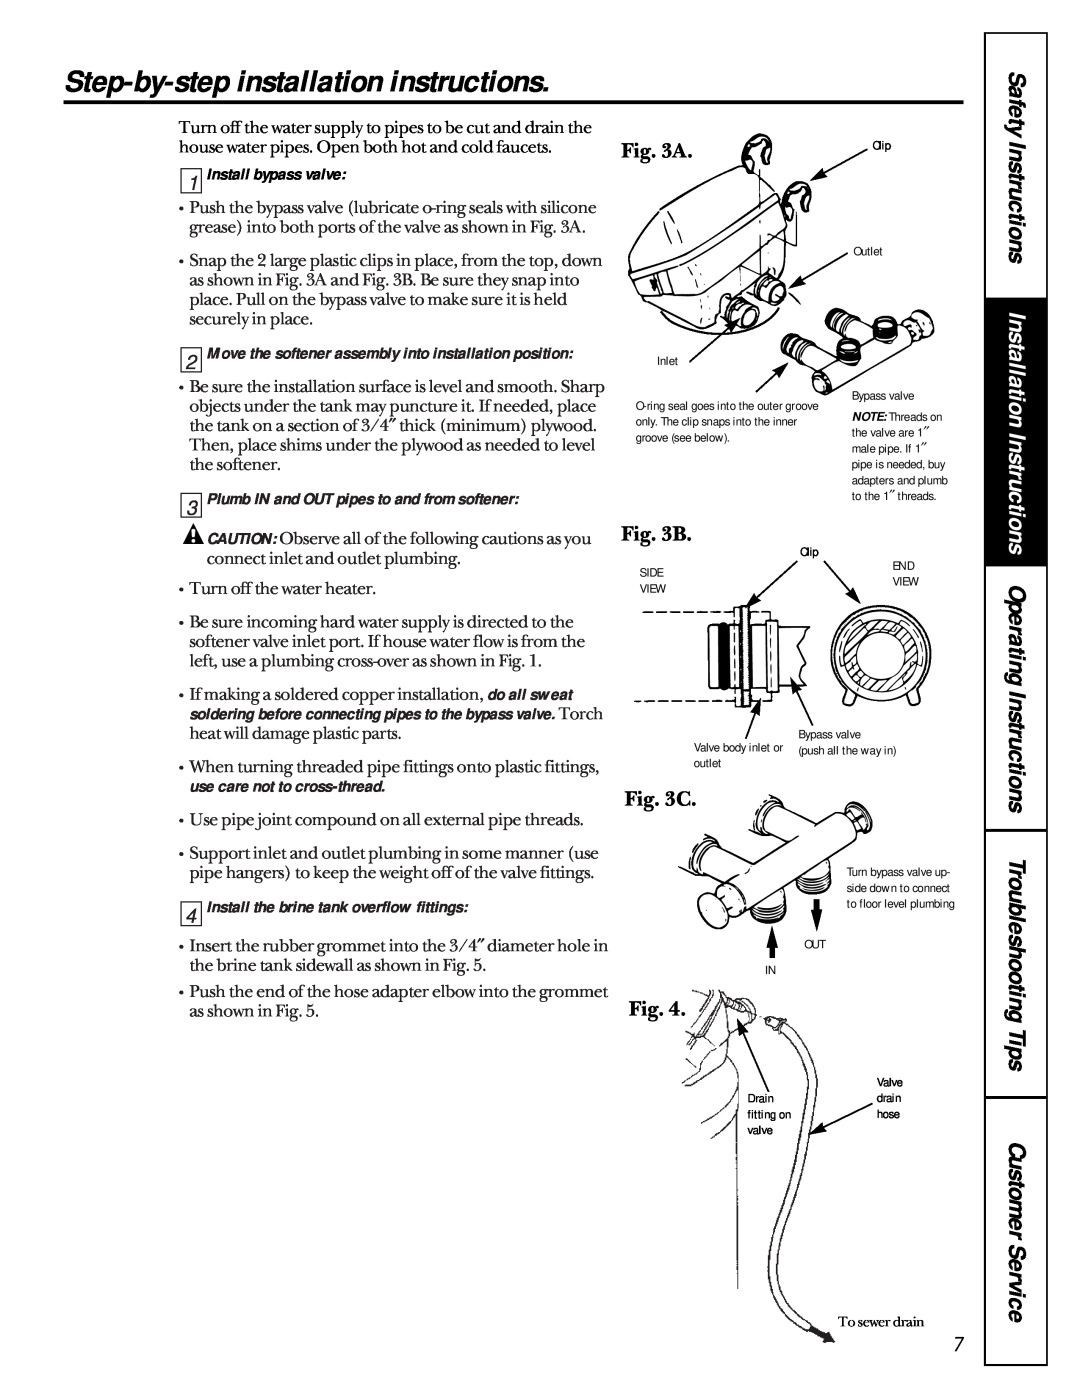 GE 6000A owner manual Step-by-step installation instructions, B, Customer Service, Install bypass valve 